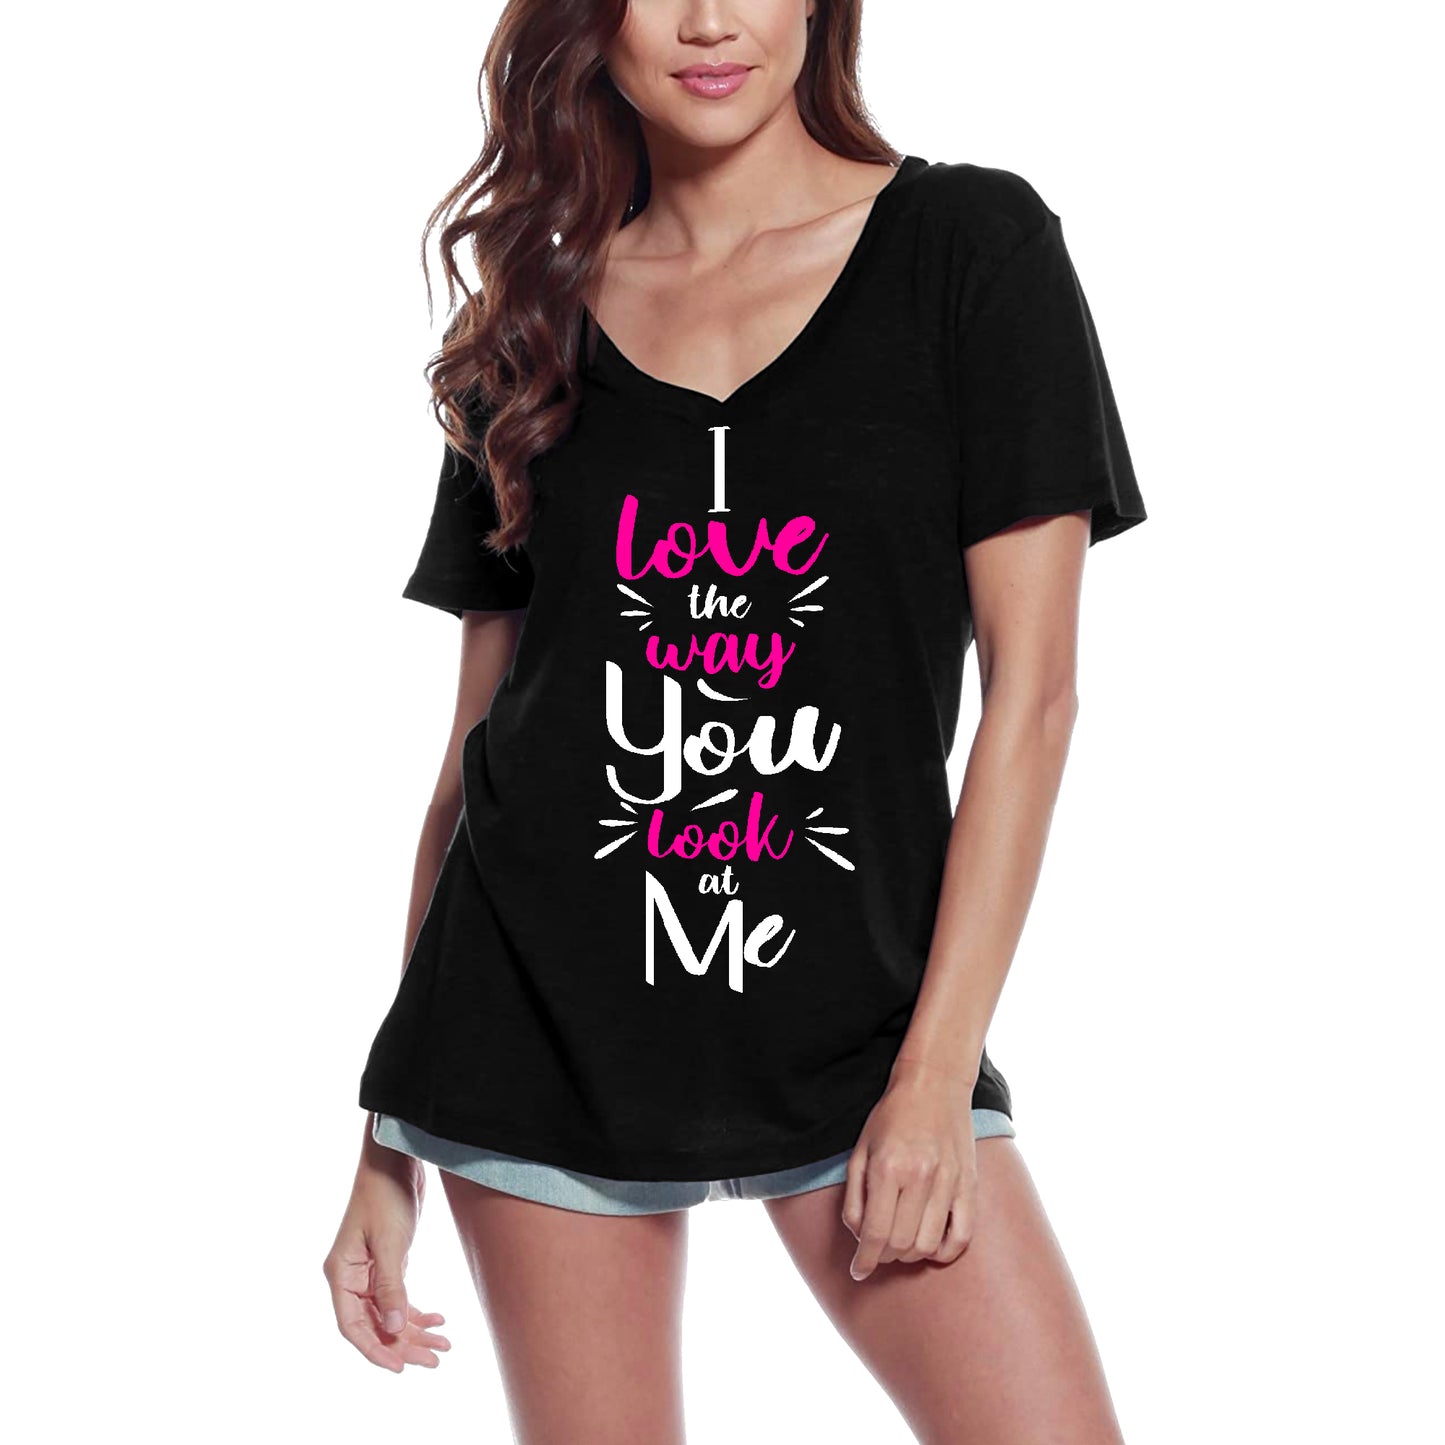 ULTRABASIC Women's Graphic T-Shirt I Love the Way You Look at Me - Love Shirt